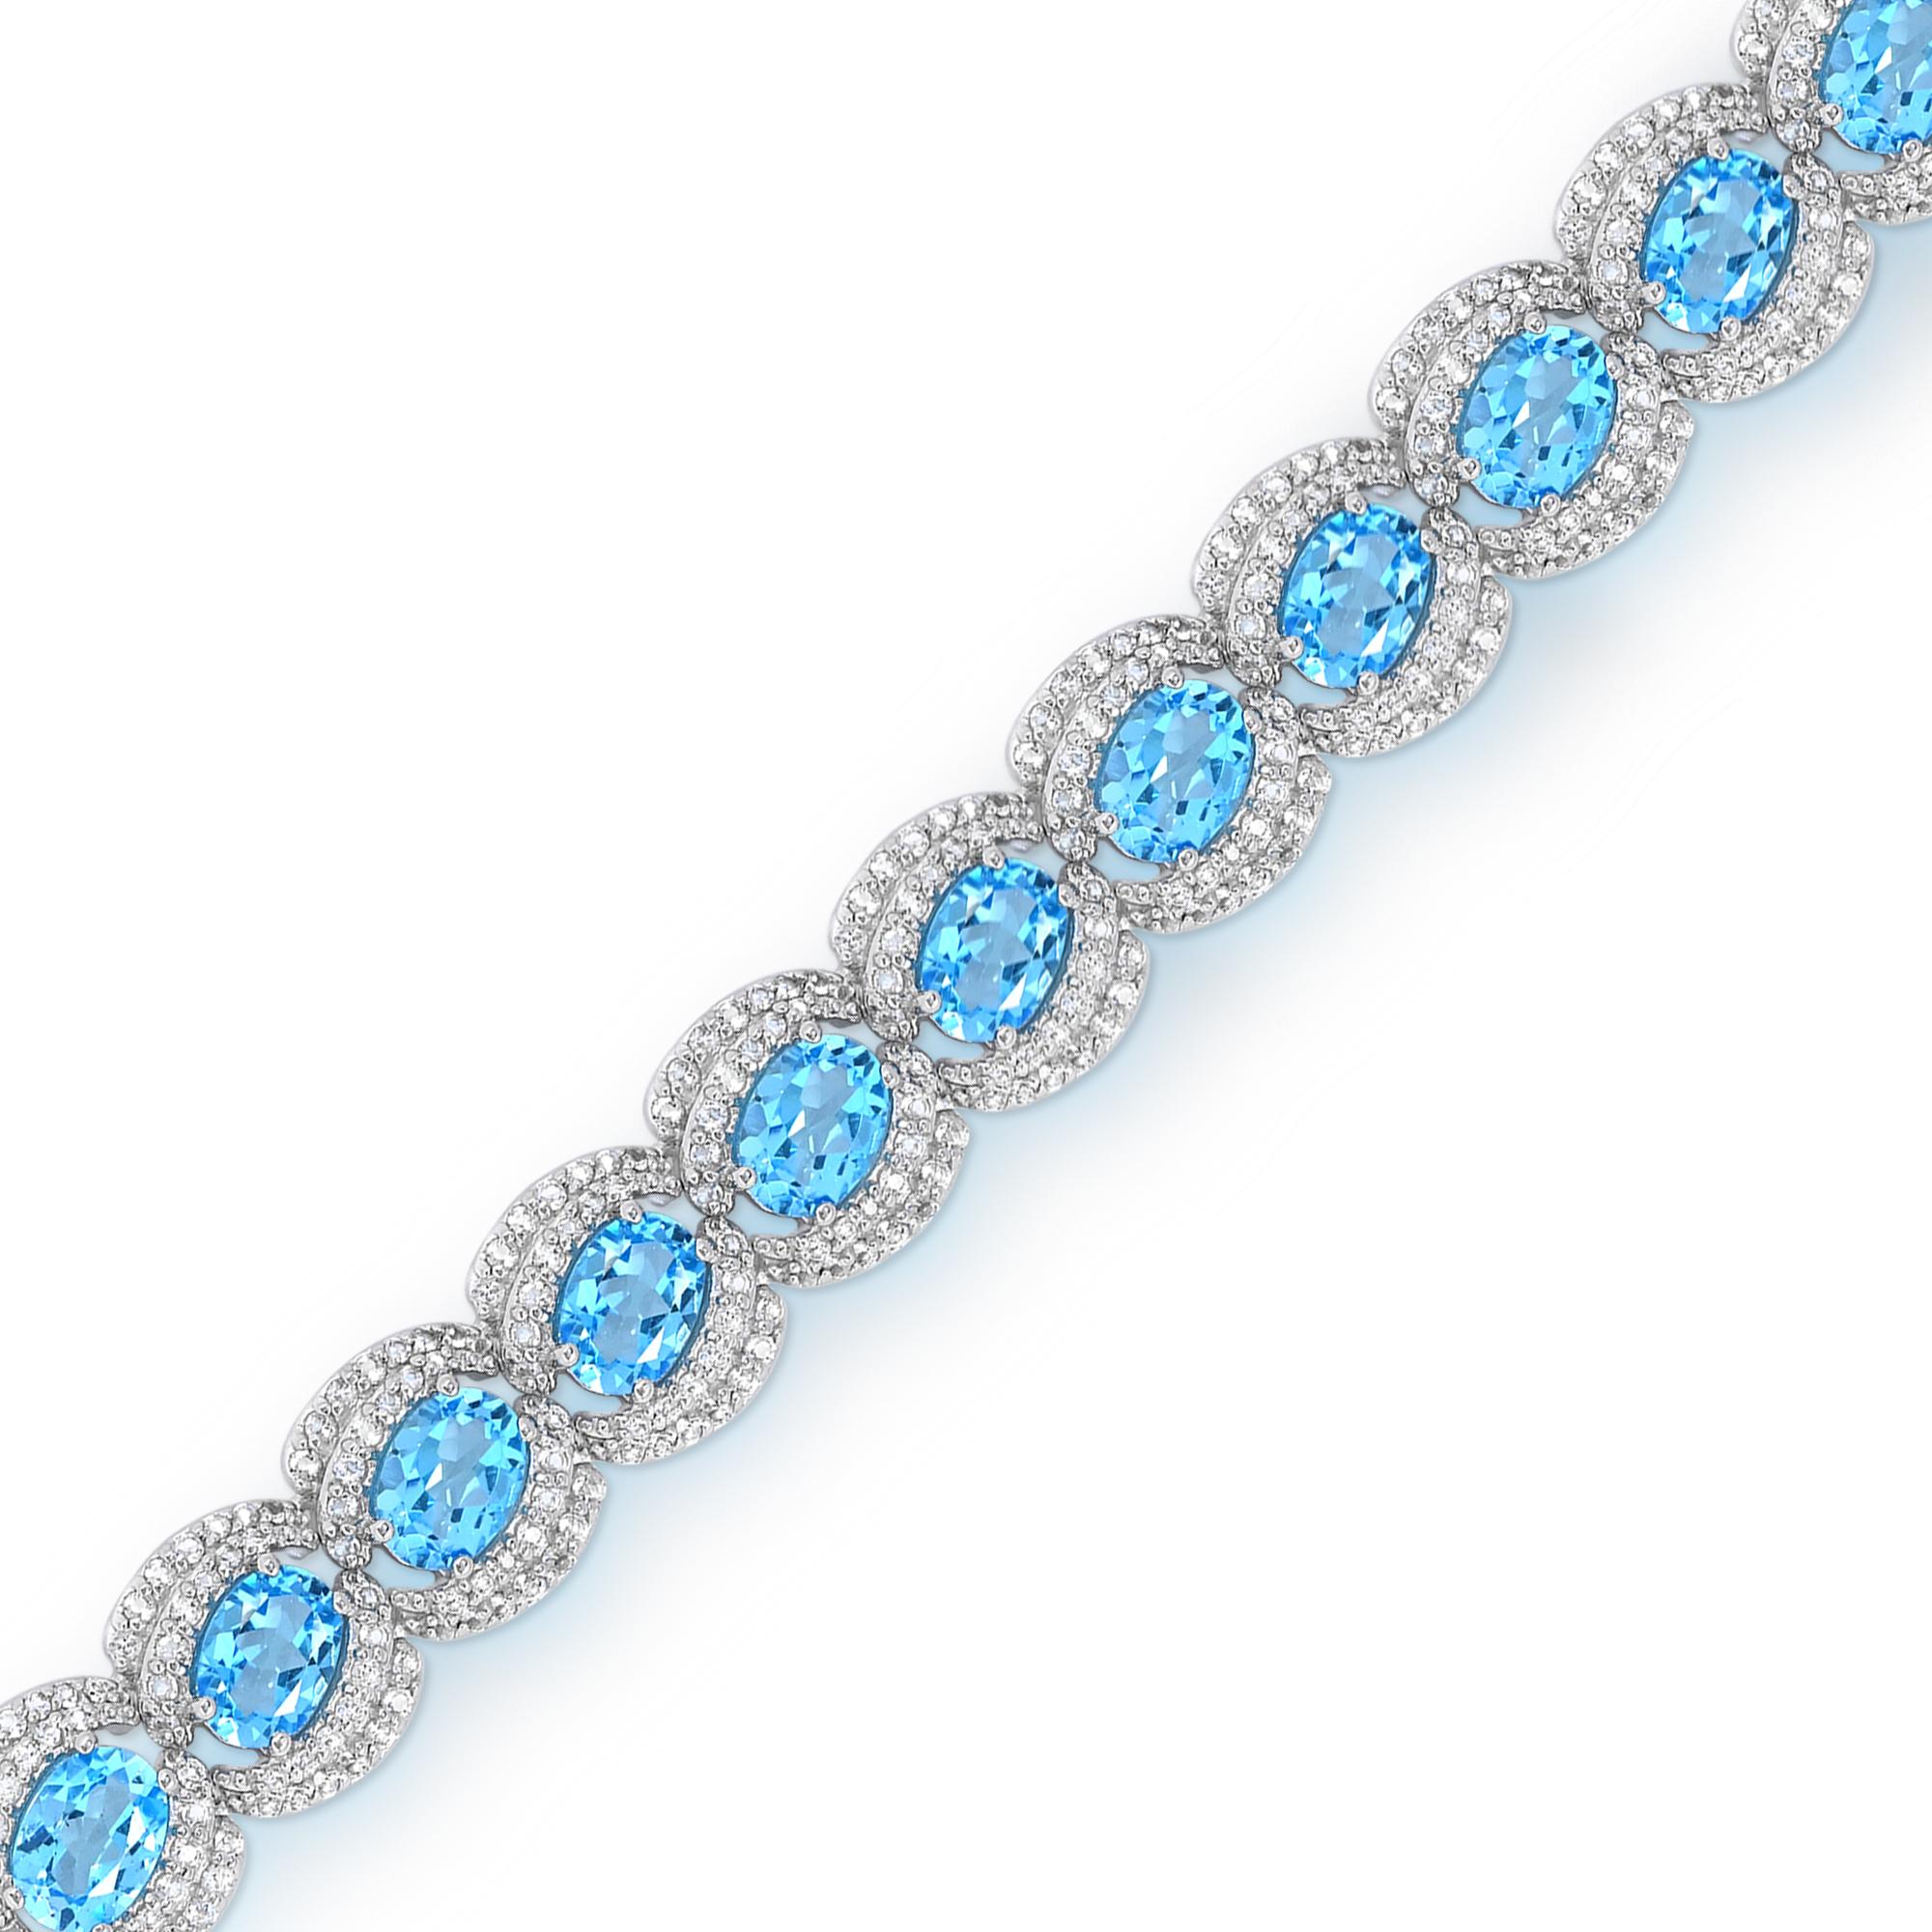 This bracelet is a statement piece for those seeking elegance and sophistication. Crafted with meticulous attention to detail, this bracelet features 19 oval-cut Swiss blue topaz gemstones, delicately accented with 532 pieces of shimmering white